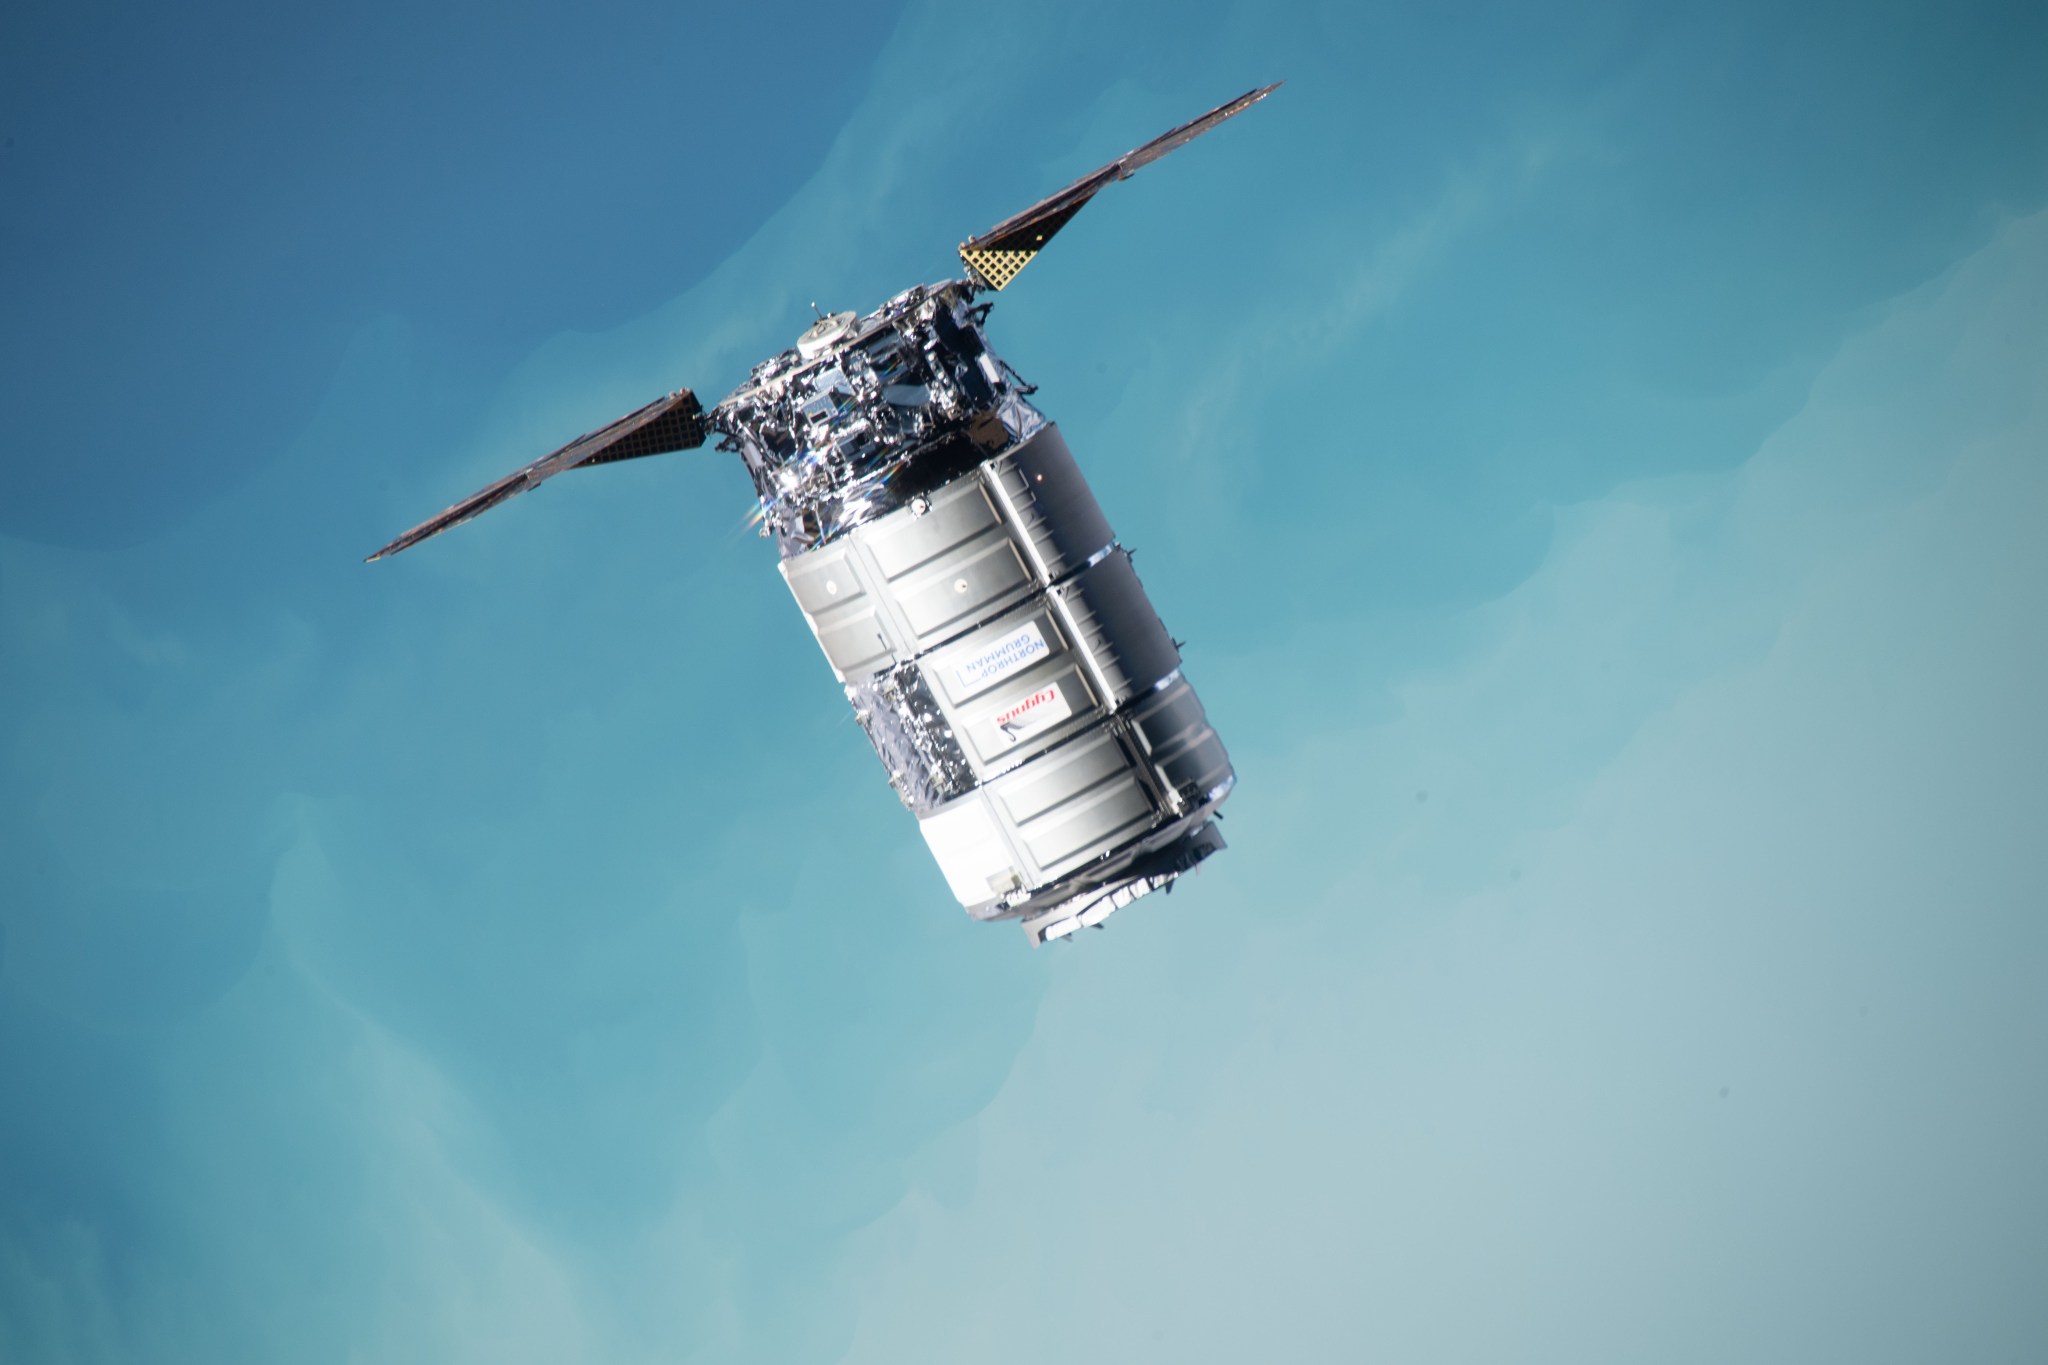 Northrop Grumman's Cygnus space freighter approaches the International Space Station to deliver more than 8,200 pounds of science experiments, crew supplies, and station hardware for the Expedition 70 crew. Both spacecraft were orbiting 259 miles above the south Pacific Ocean at the time of this photograph.